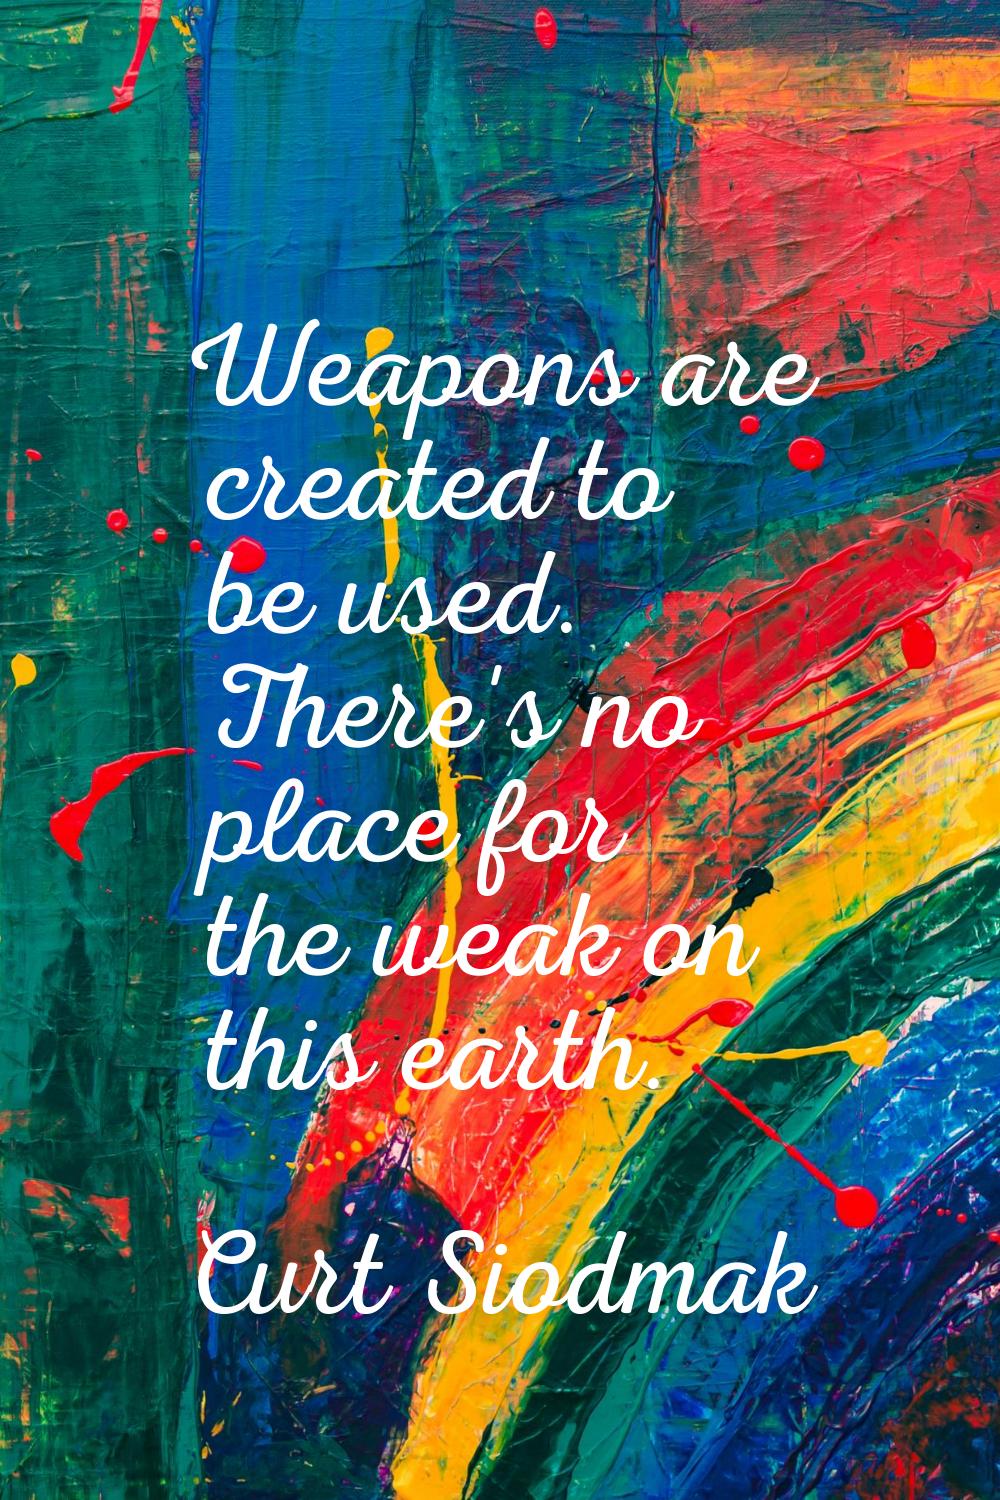 Weapons are created to be used. There's no place for the weak on this earth.